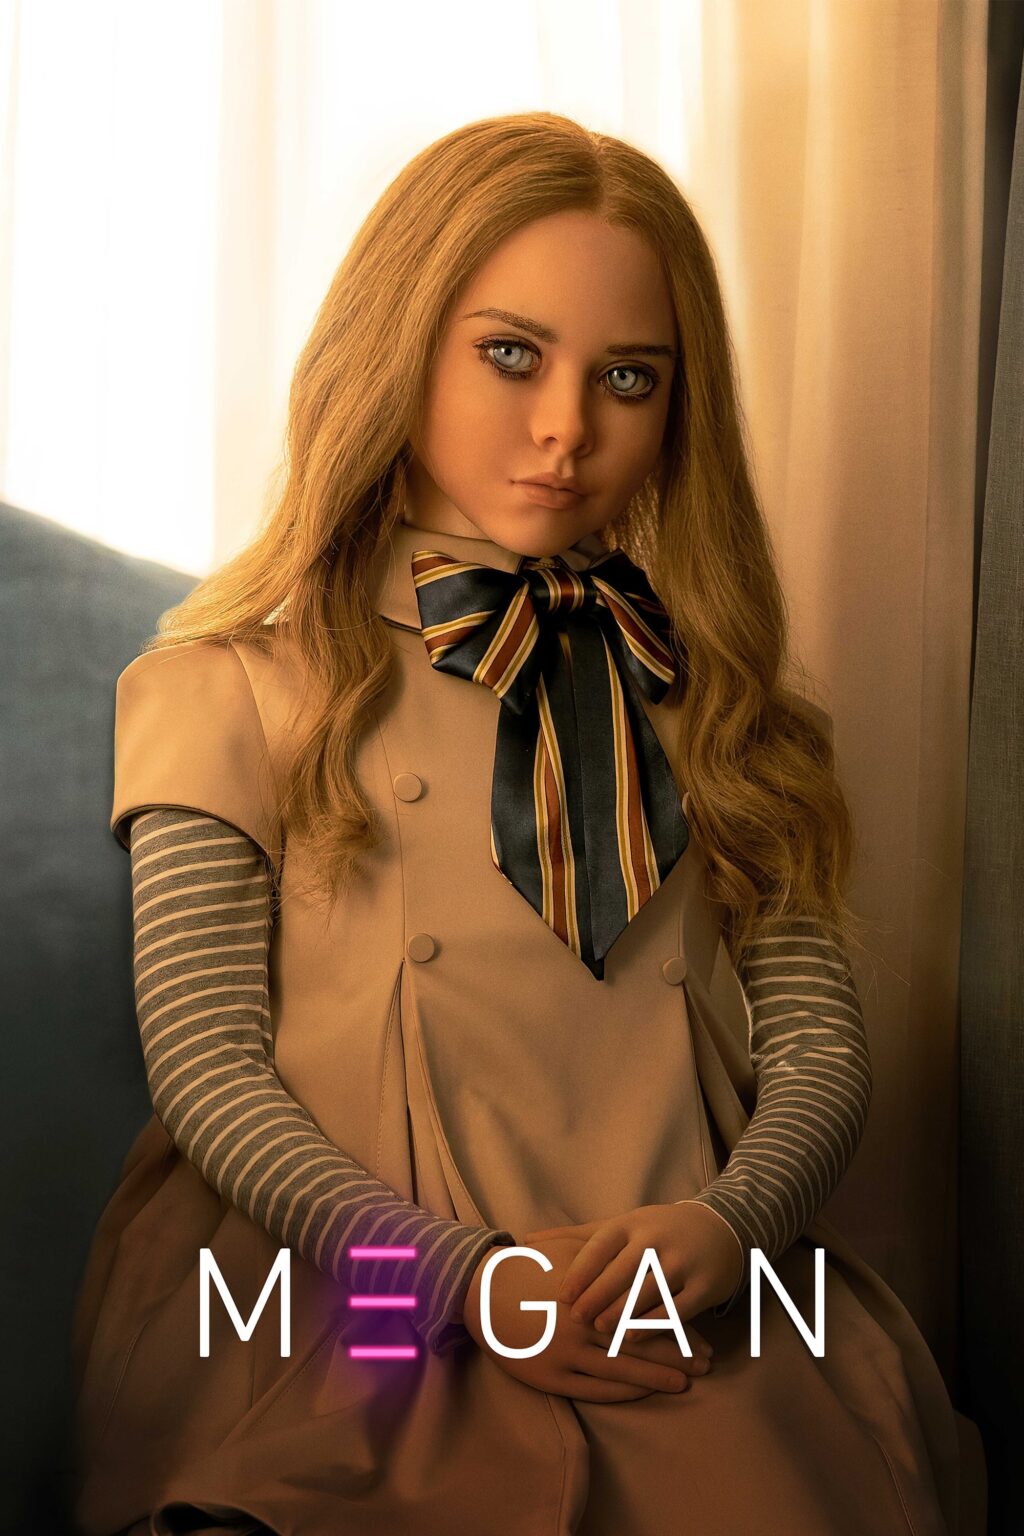 Poster for the movie "M3GAN"